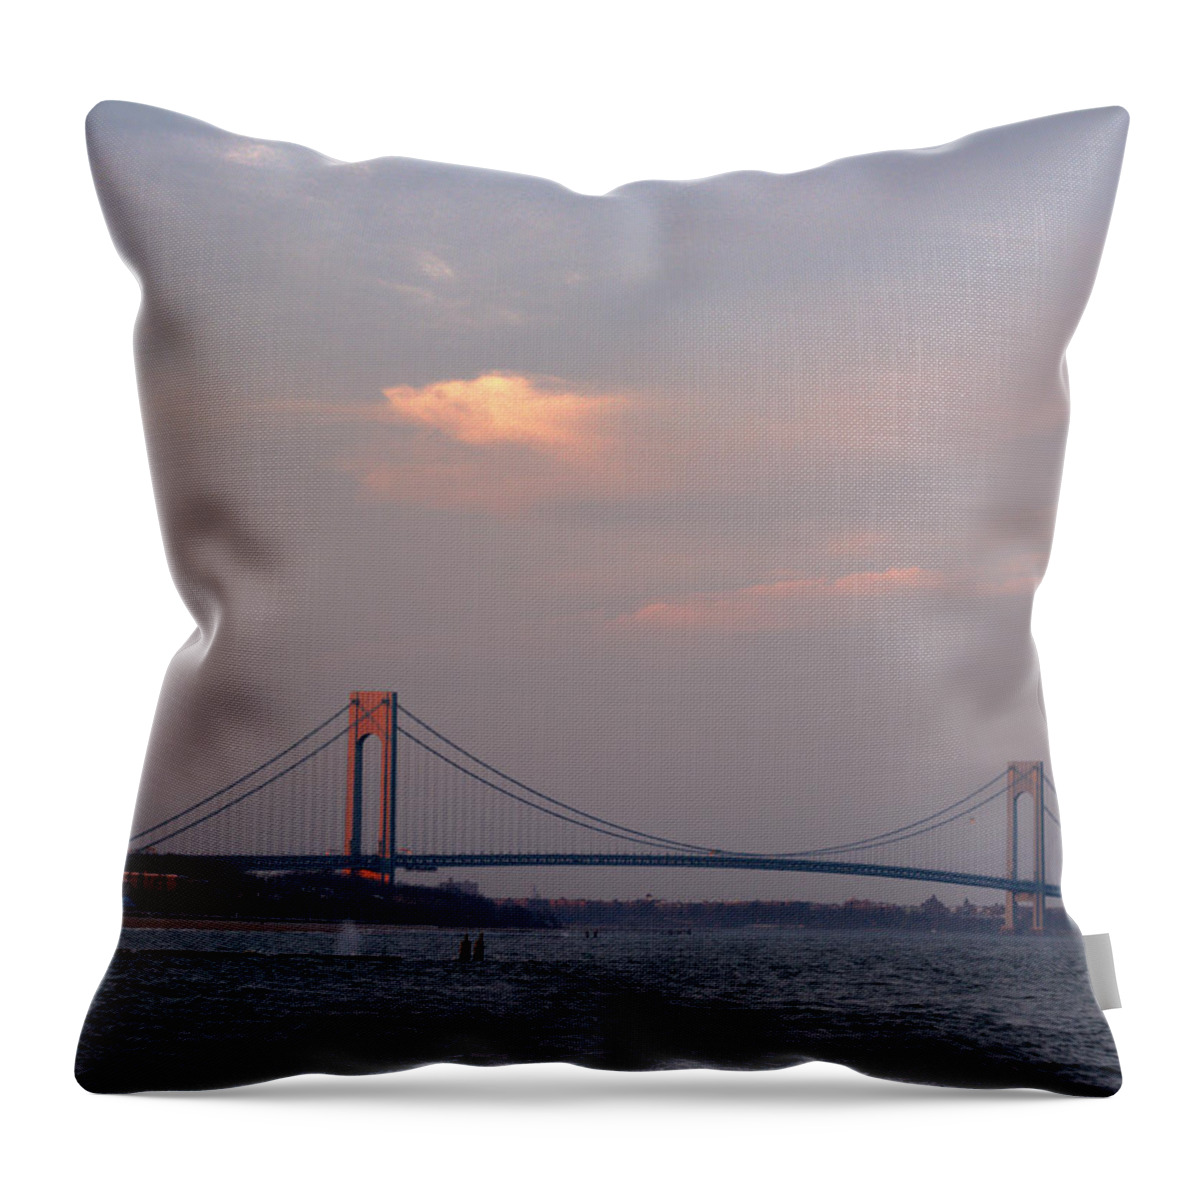 Verrazano Narrows Bridge At Sunset Throw Pillow featuring the photograph Verrazano Narrows Bridge at Sunset by Kenneth Cole